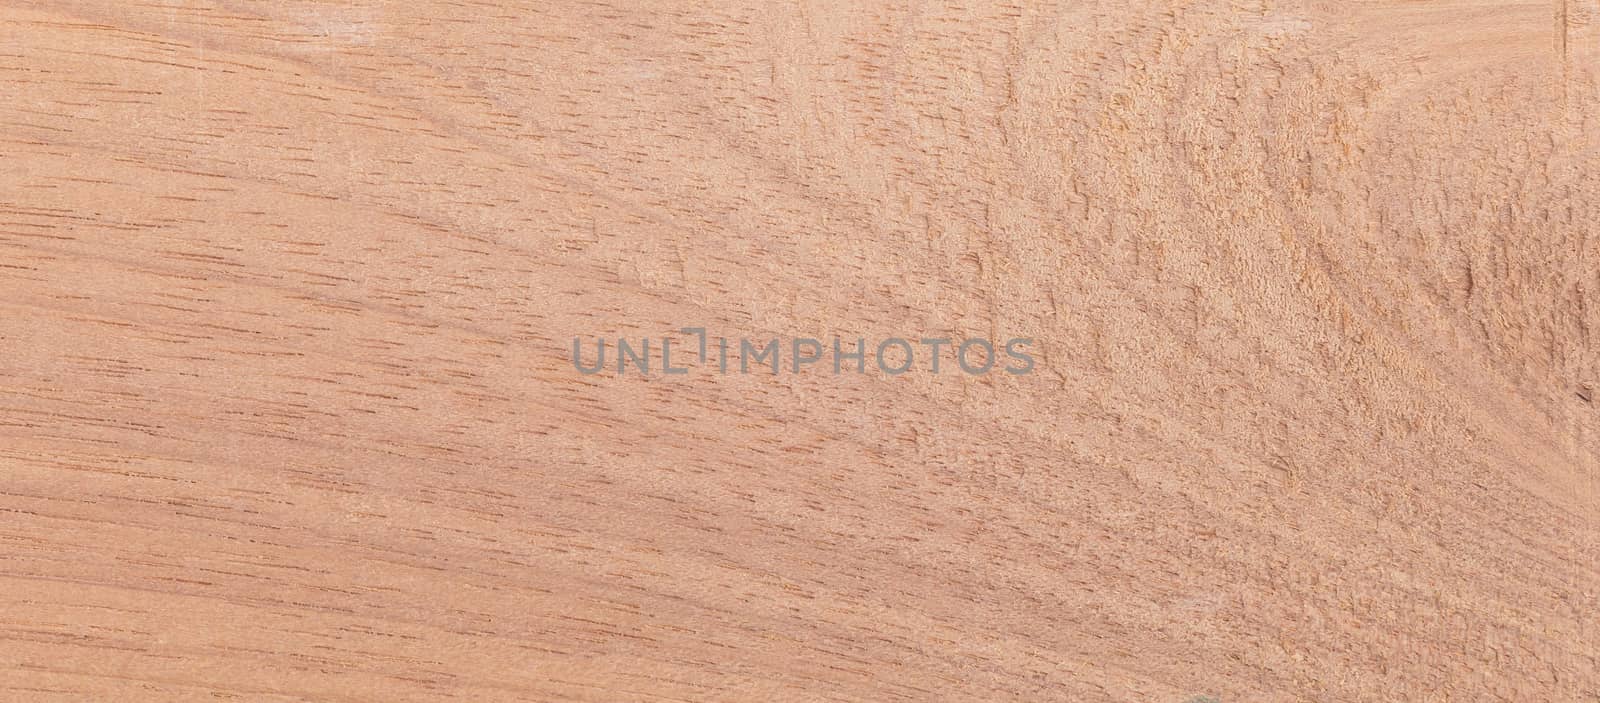 Wood background - Wood from the tropical rainforest - Suriname - Couratari spp